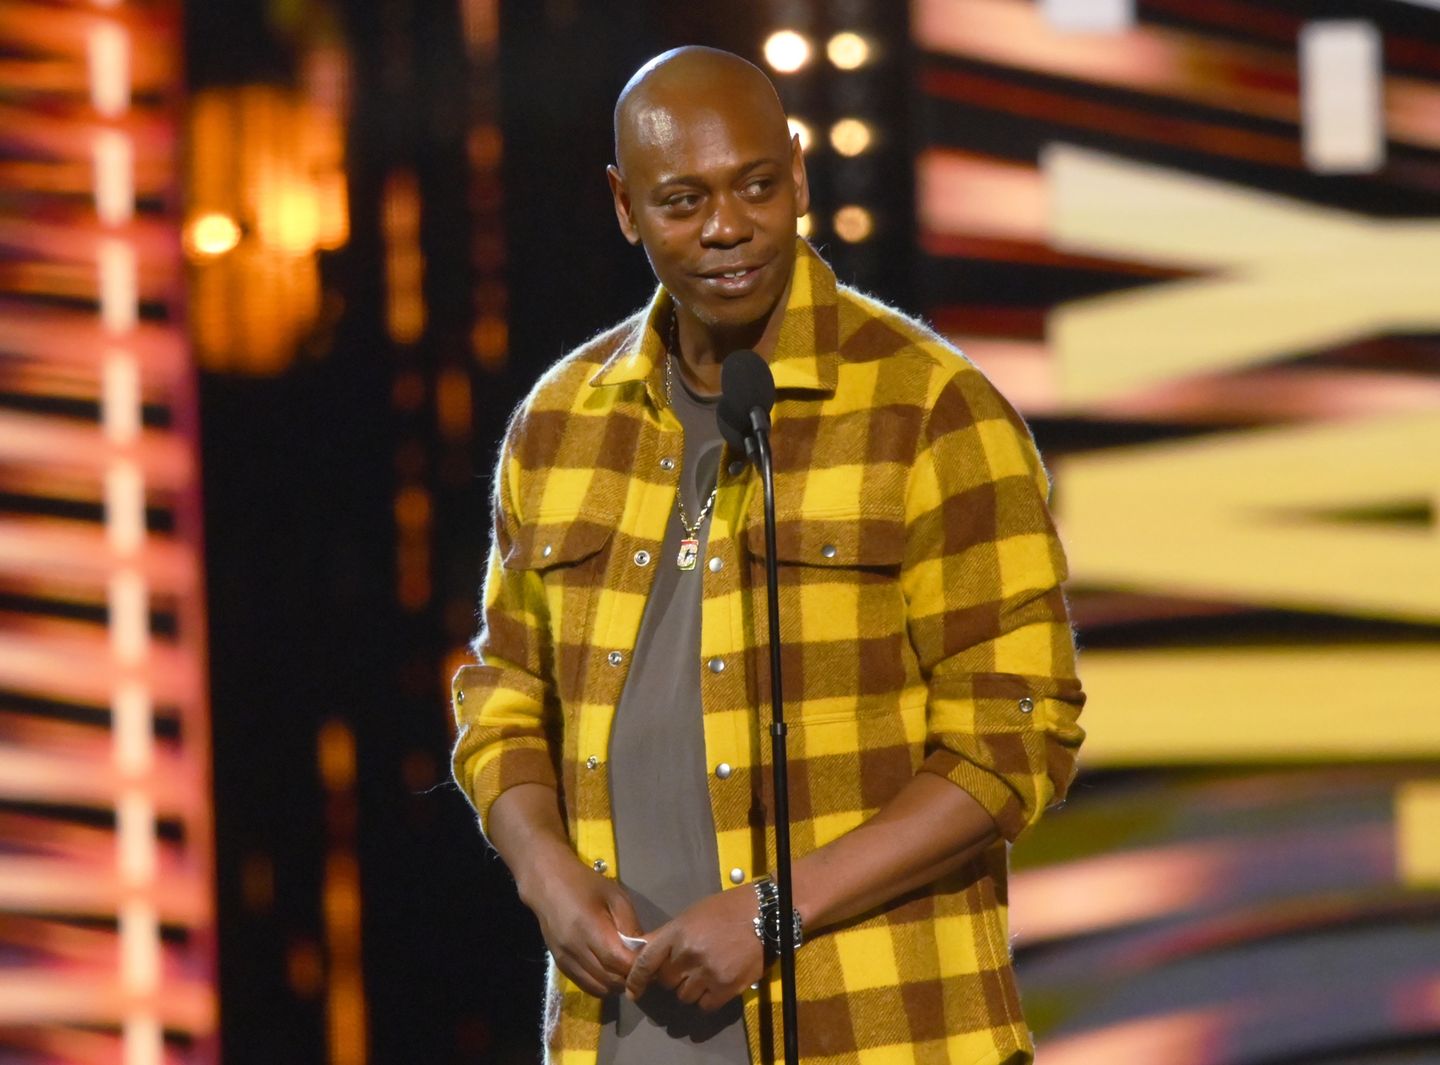 Los Angeles DA defends not charging Dave Chappelle attacker with felony